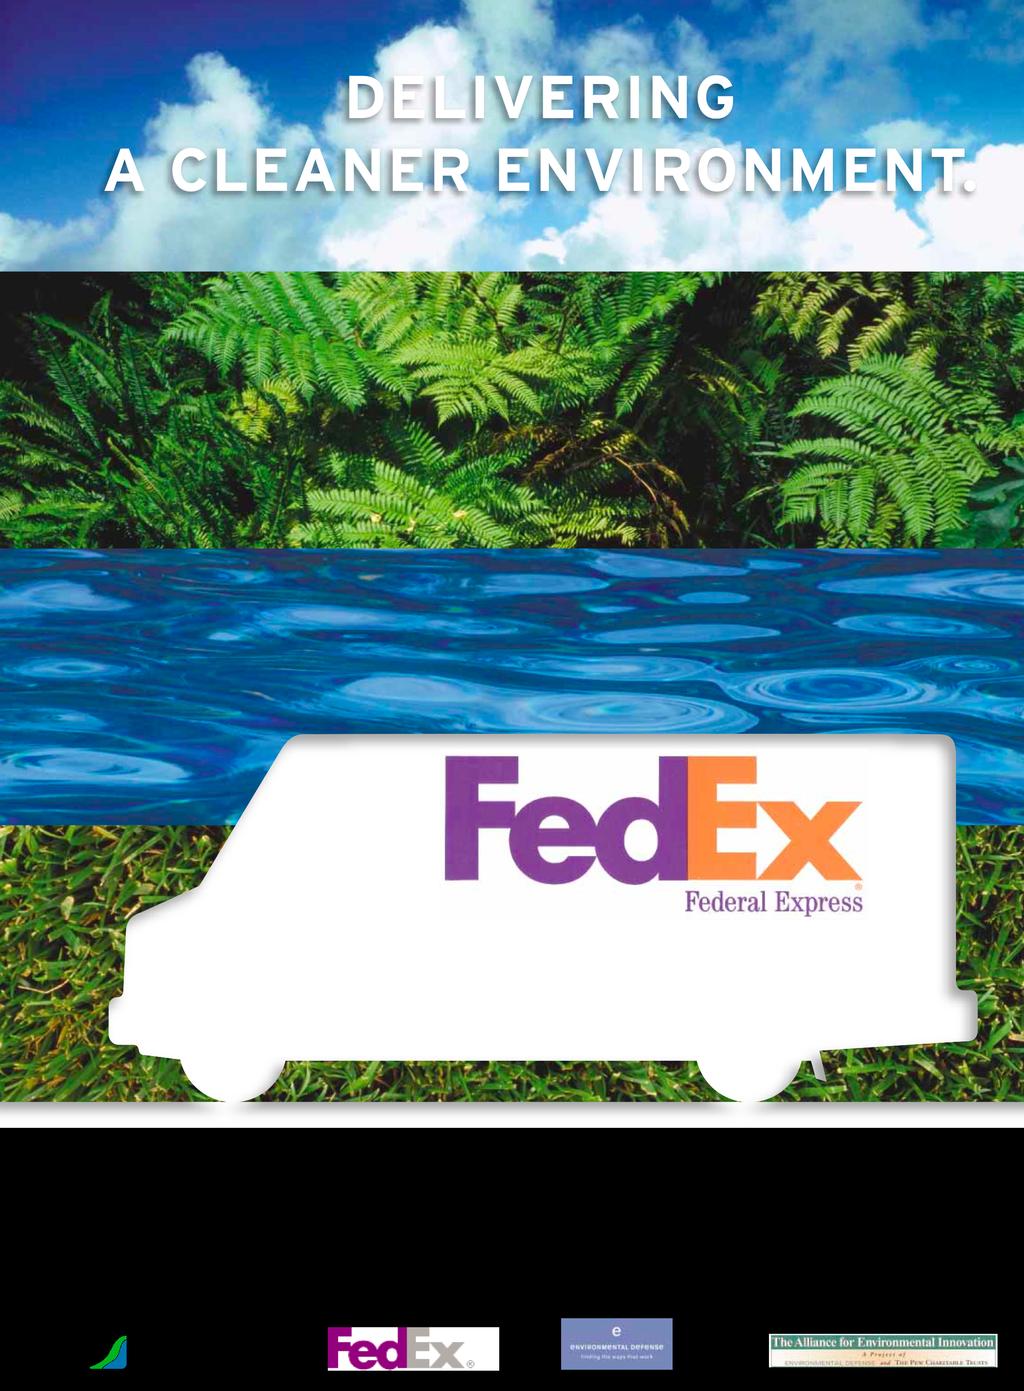 s c Clean Vehicle Standard was applied to FedEx Eaton power train hybrid truc As the maret leader, Toyota followed suit with Prius & other hybrids which forced Ford and others to